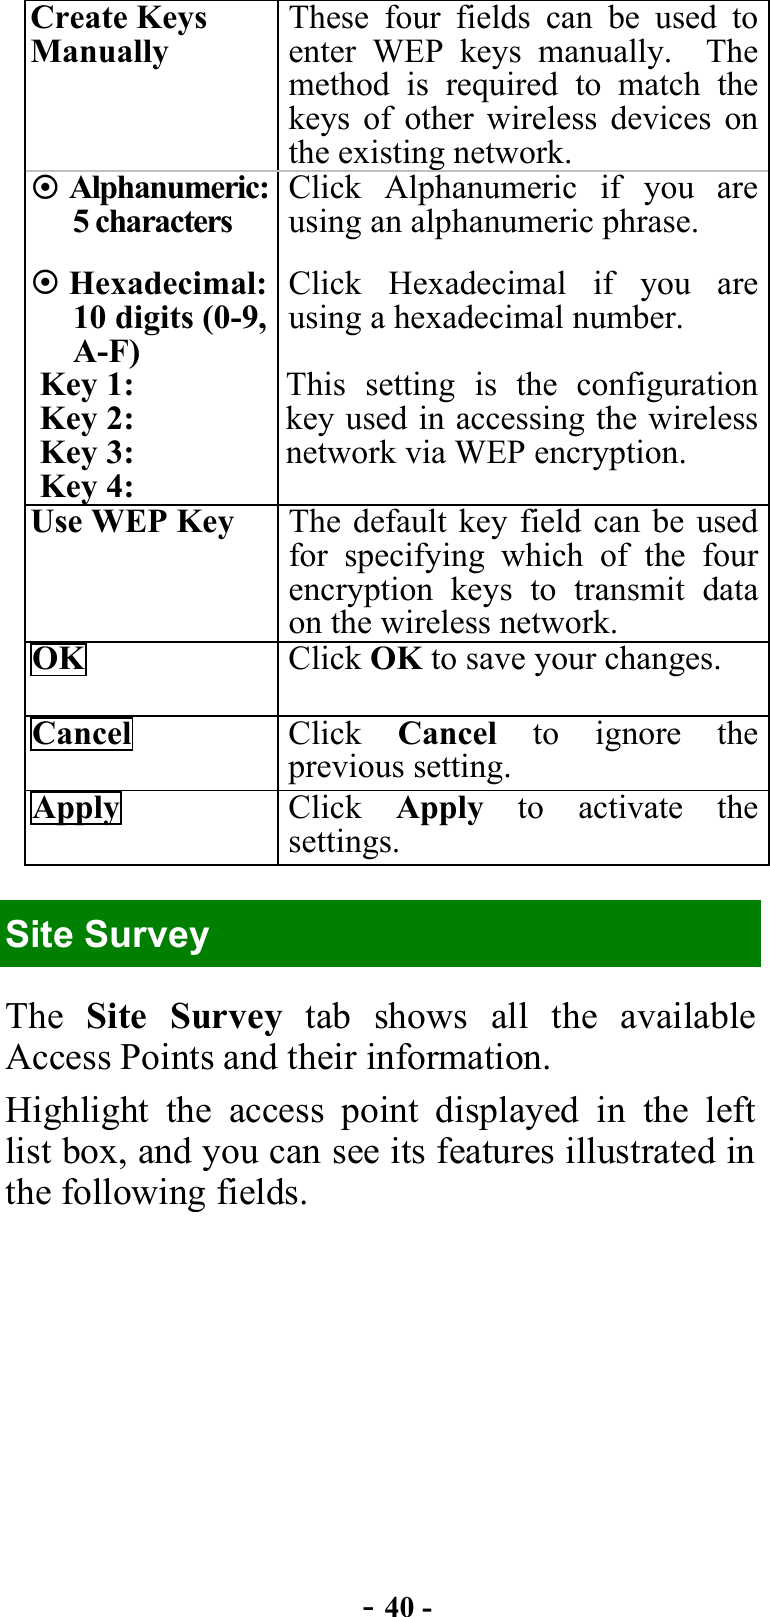  - 40 - Create Keys Manually These four fields can be used to enter WEP keys manually.  The method is required to match the keys of other wireless devices on the existing network.  Alphanumeric: 5 characters Click Alphanumeric if you are using an alphanumeric phrase.  Hexadecimal: 10 digits (0-9, A-F) Click Hexadecimal if you are using a hexadecimal number. Key 1: Key 2: Key 3: Key 4: This setting is the configuration key used in accessing the wireless network via WEP encryption. Use WEP Key  The default key field can be used for specifying which of the four encryption keys to transmit data on the wireless network. OK  Click OK to save your changes. Cancel  Click  Cancel to ignore the previous setting. Apply  Click  Apply  to activate the settings. Site Survey The  Site Survey tab shows all the available Access Points and their information. Highlight the access point displayed in the left list box, and you can see its features illustrated in the following fields. 